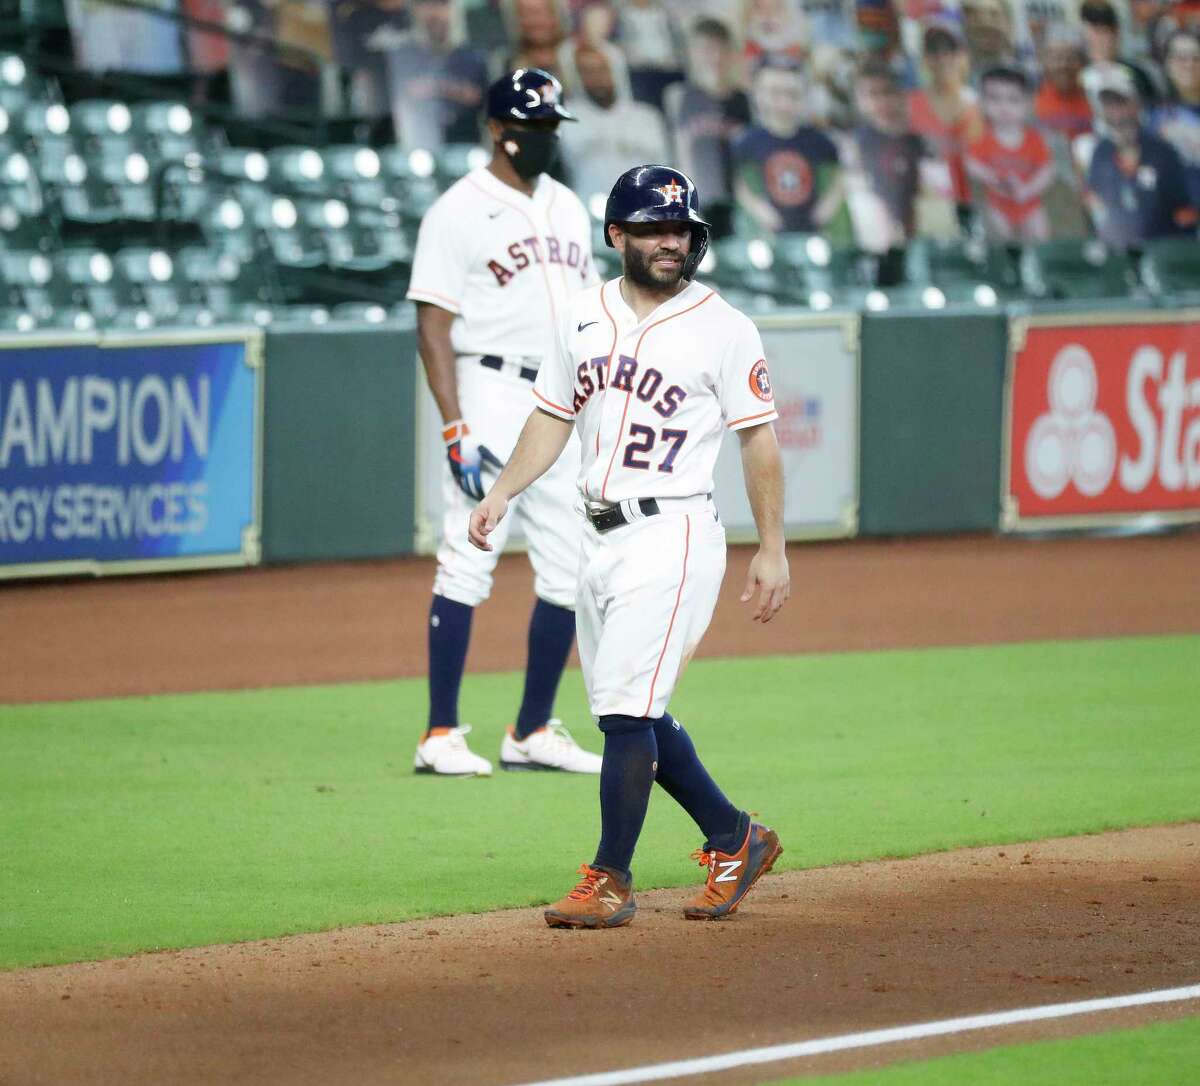 Houston Astros Jose Altuve (27) grimaces at third base after he slid into third as Yuli Gurriel lined out during the first inning of an MLB baseball game at Minute Maid Park, Thursday, September 3, 2020, in Houston.